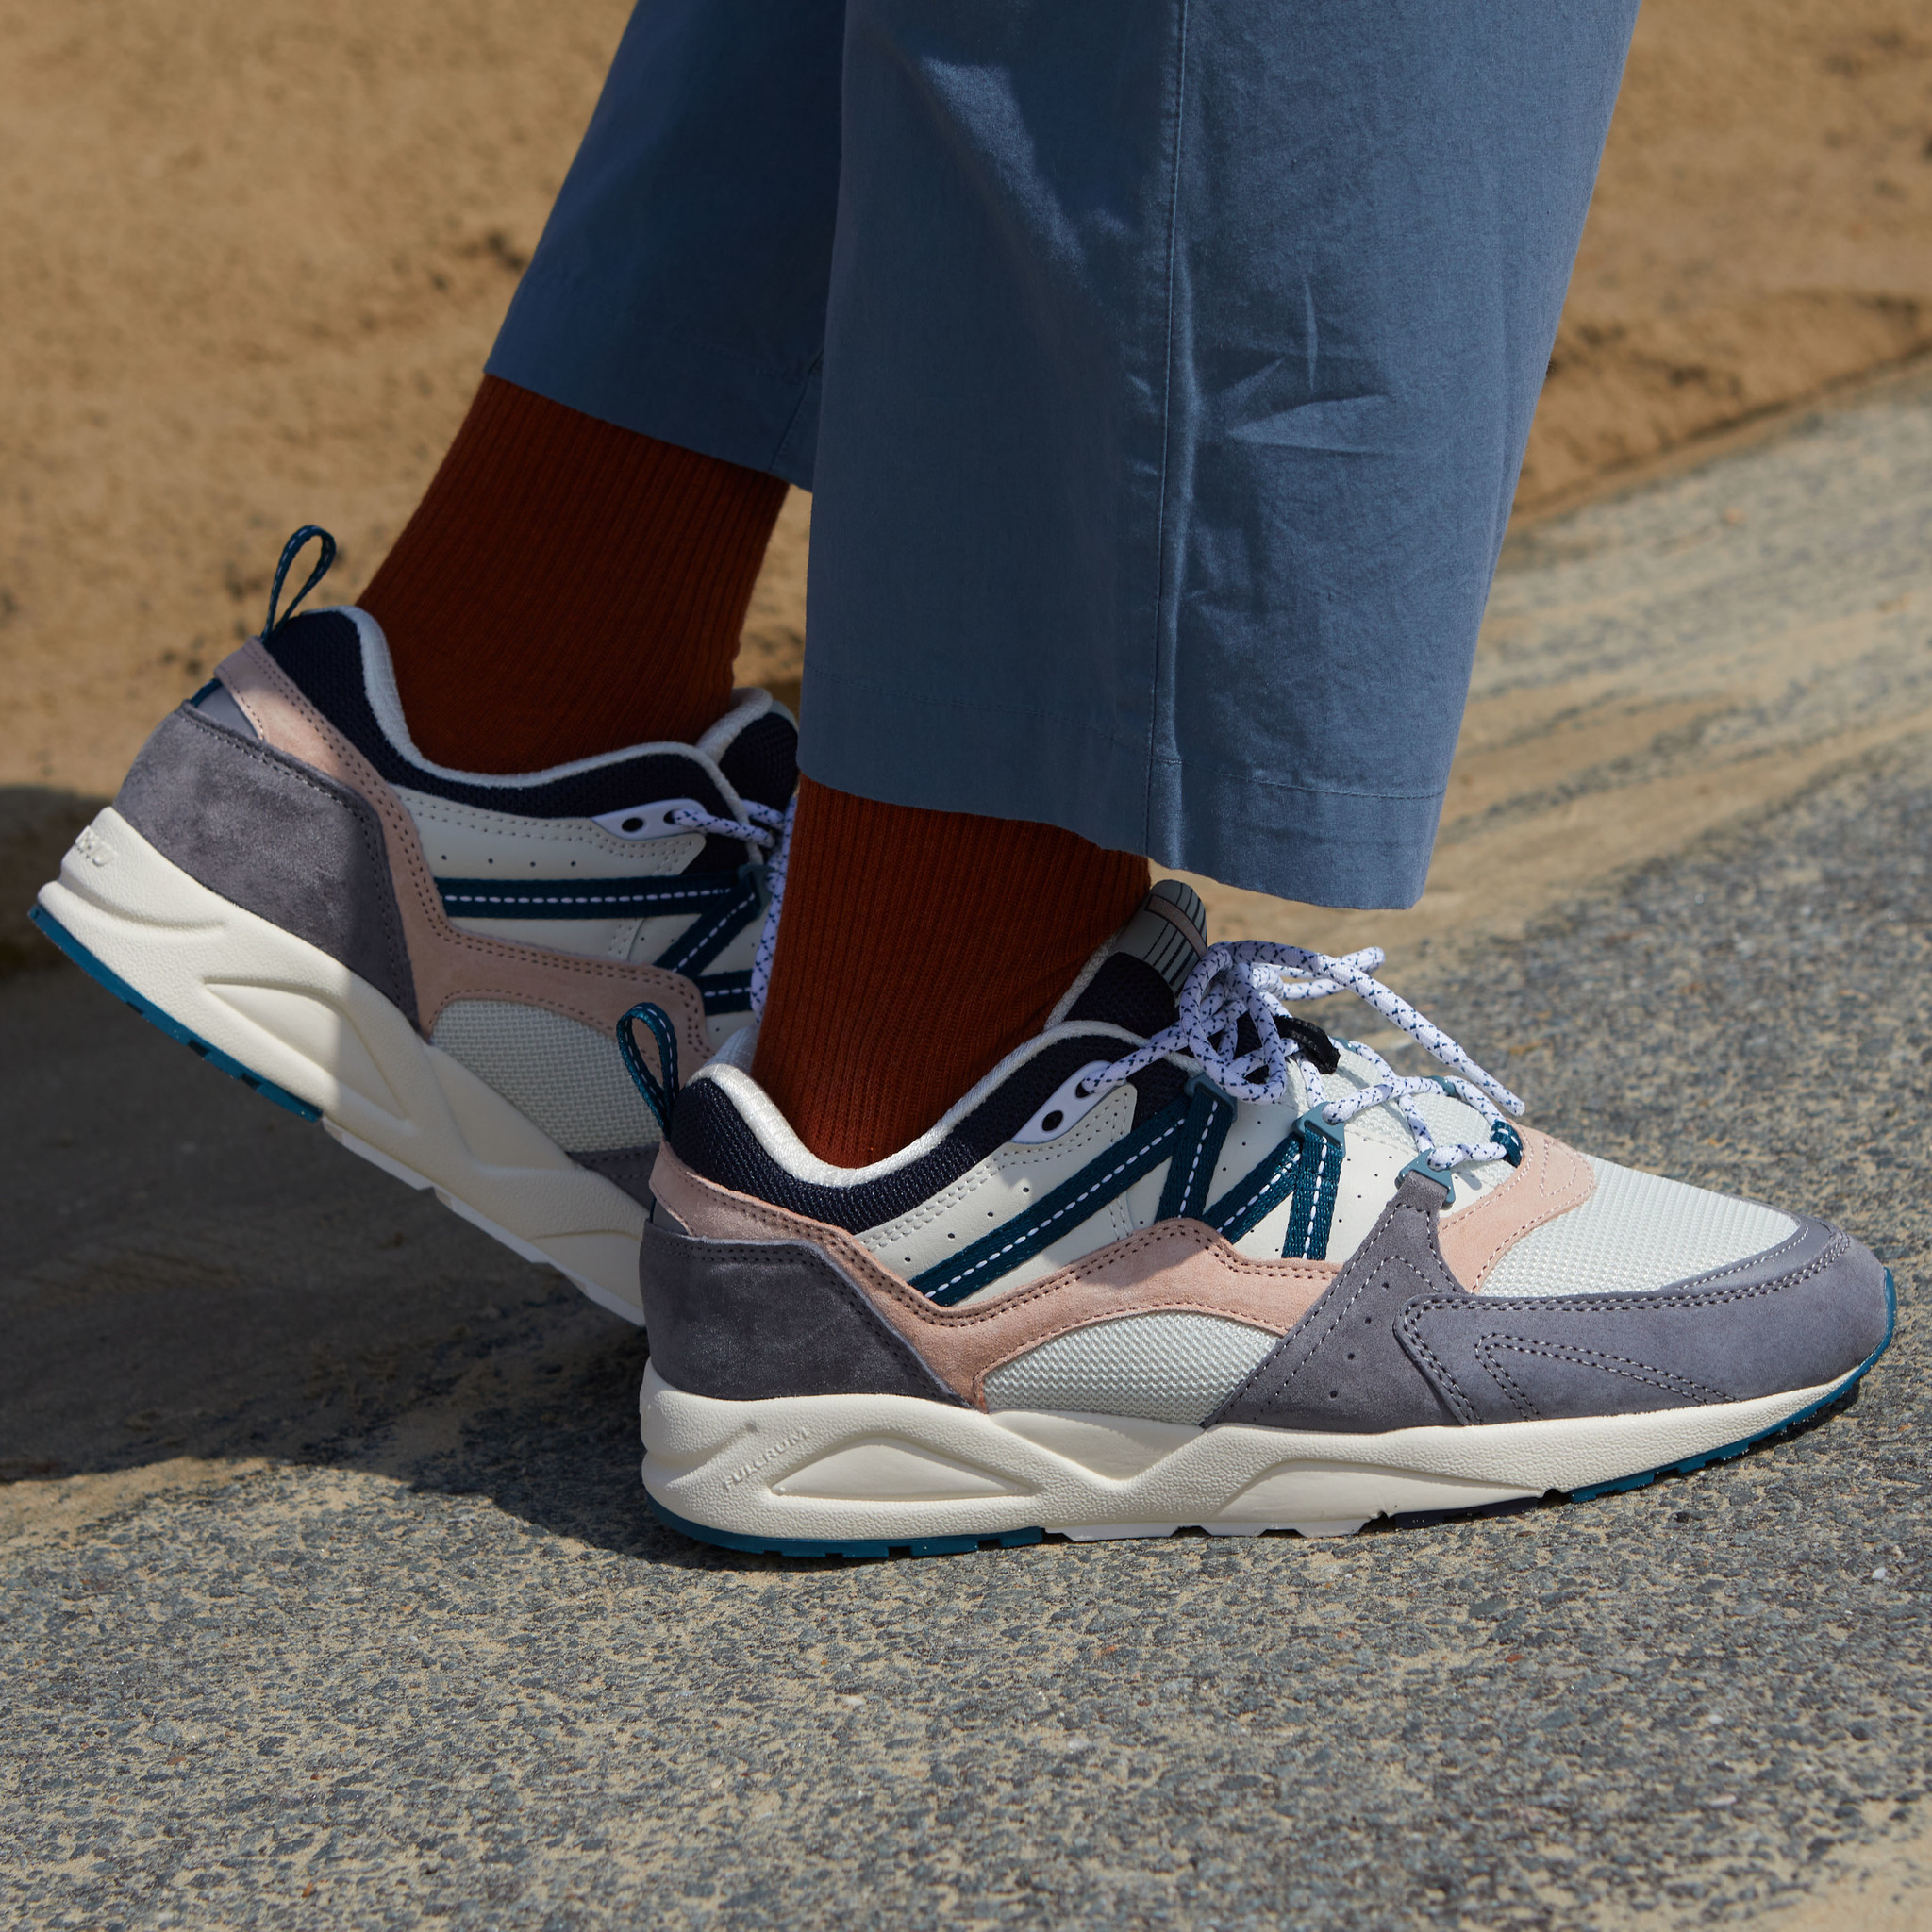 Karhu Fusion 2.0 (Frost Gray/Blue Coral) F804108